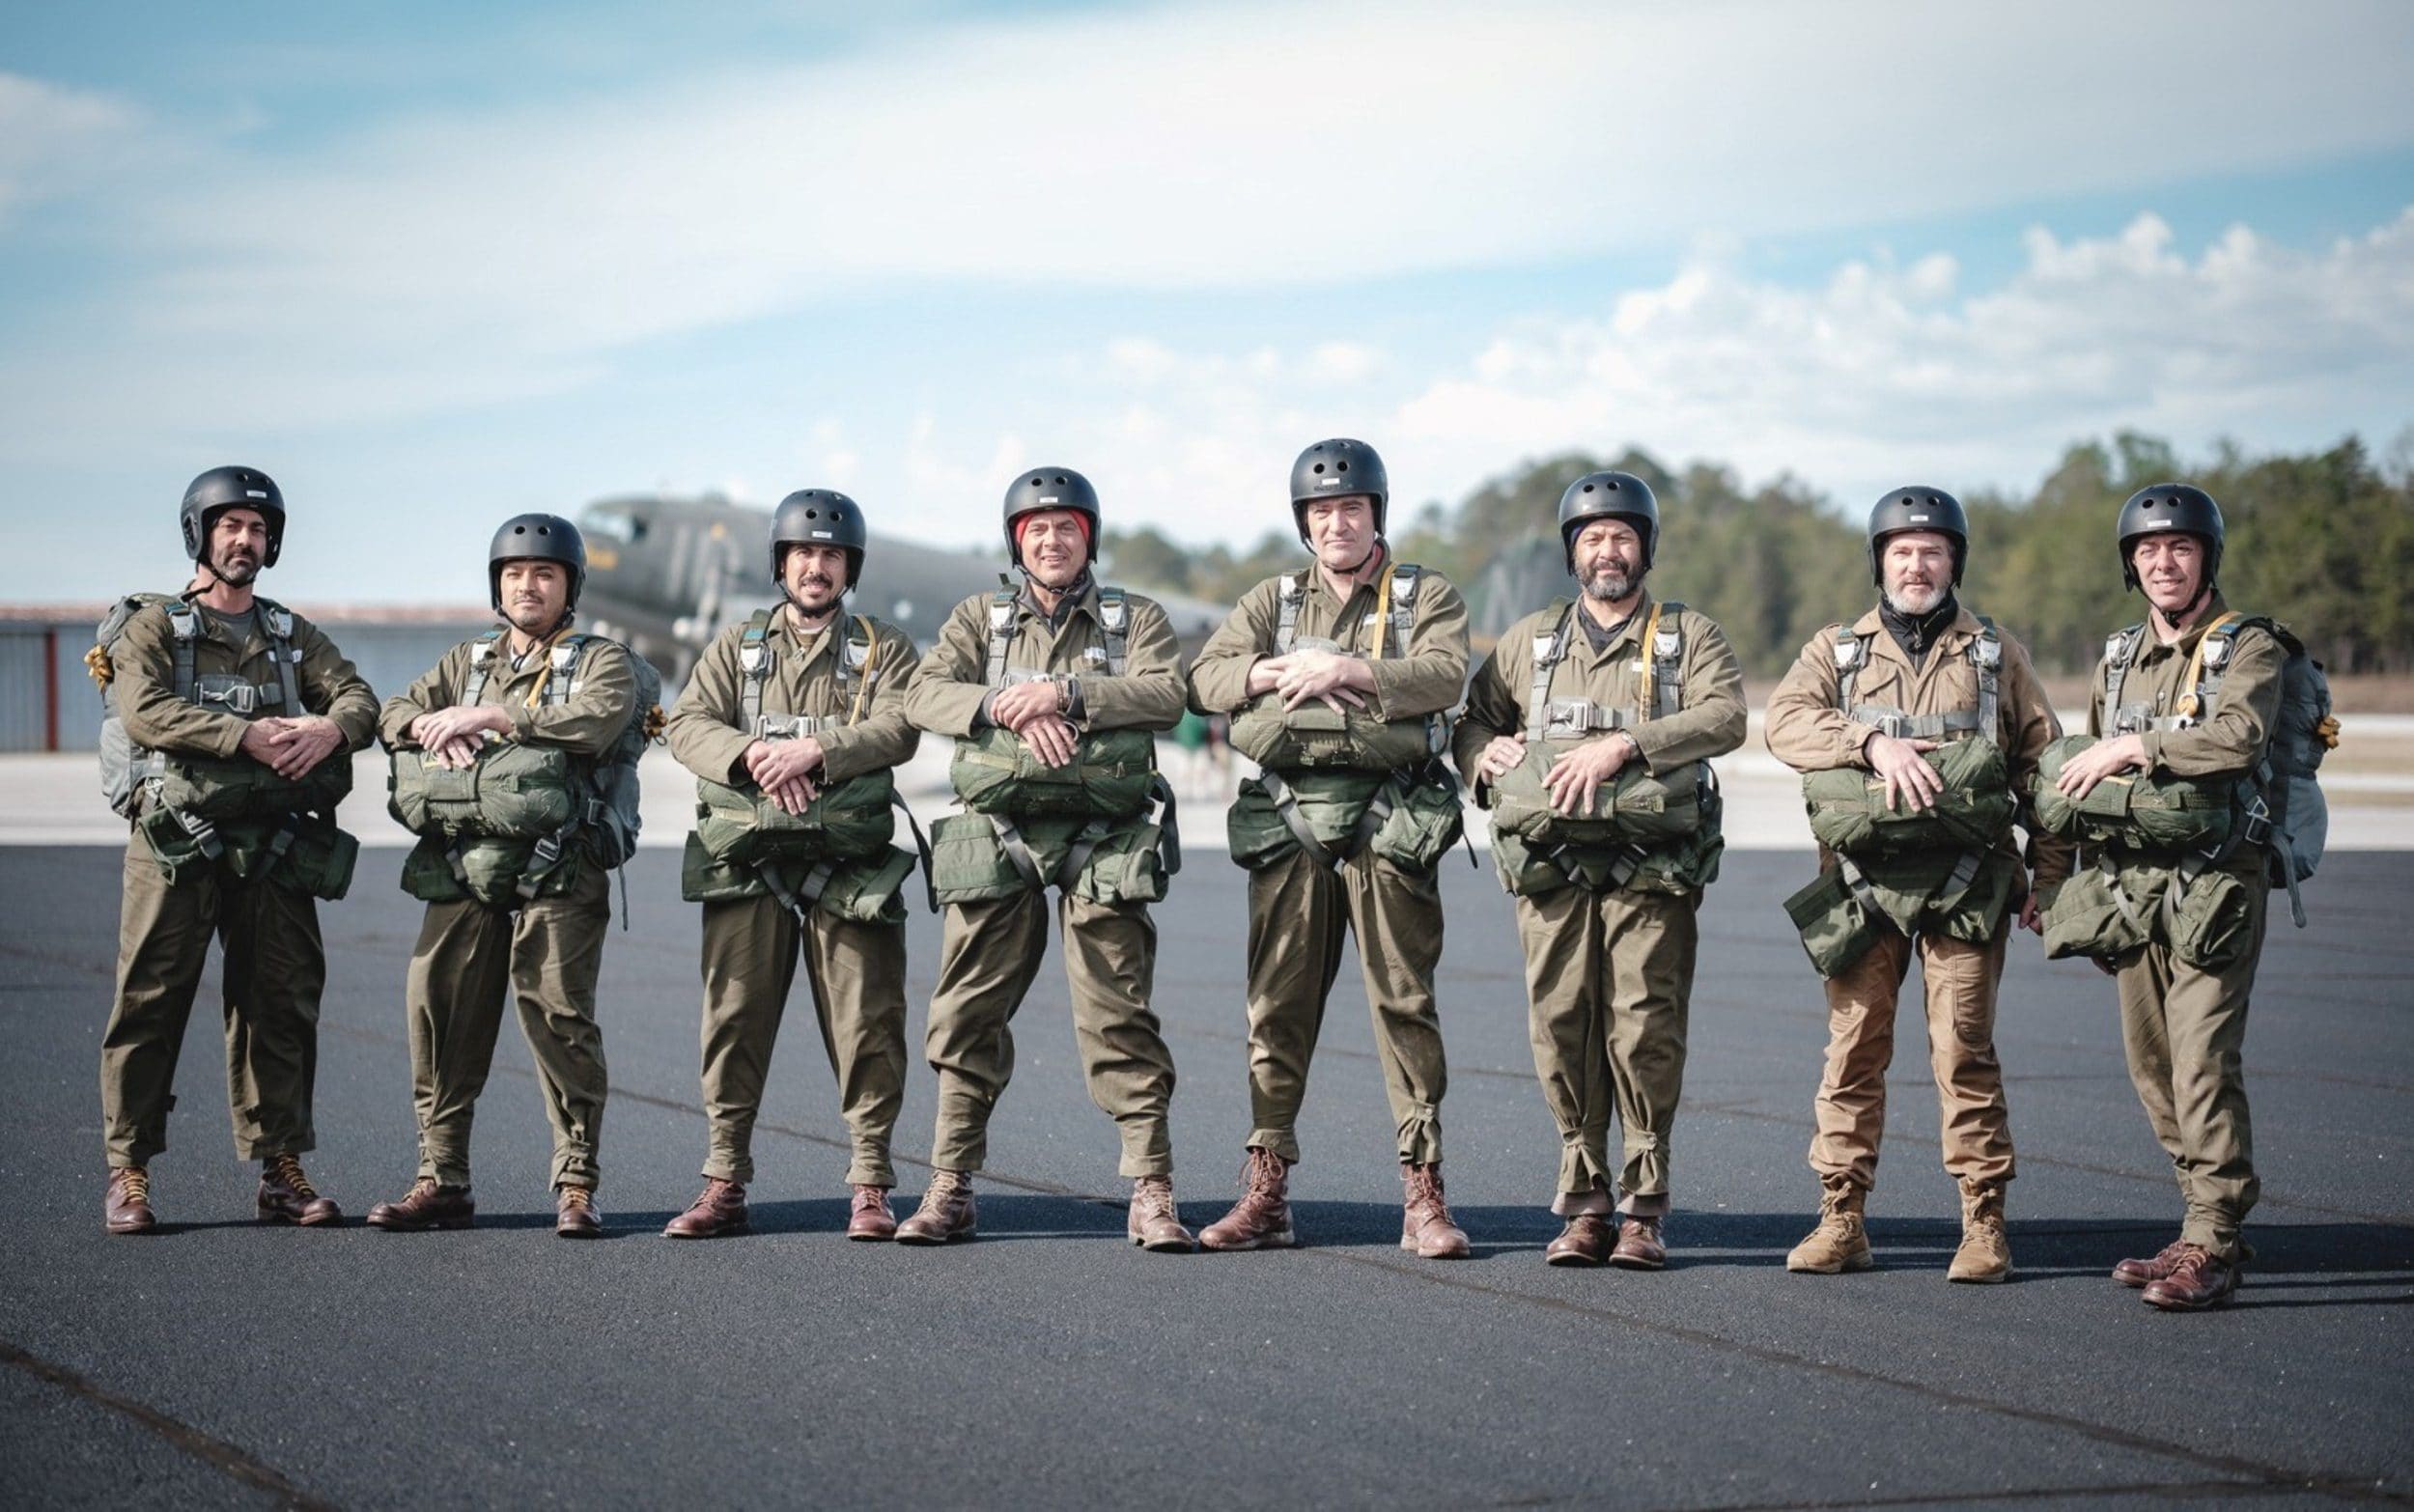 Band of Brothers actors reunite for parachute jump over Normandy to mark D-Day